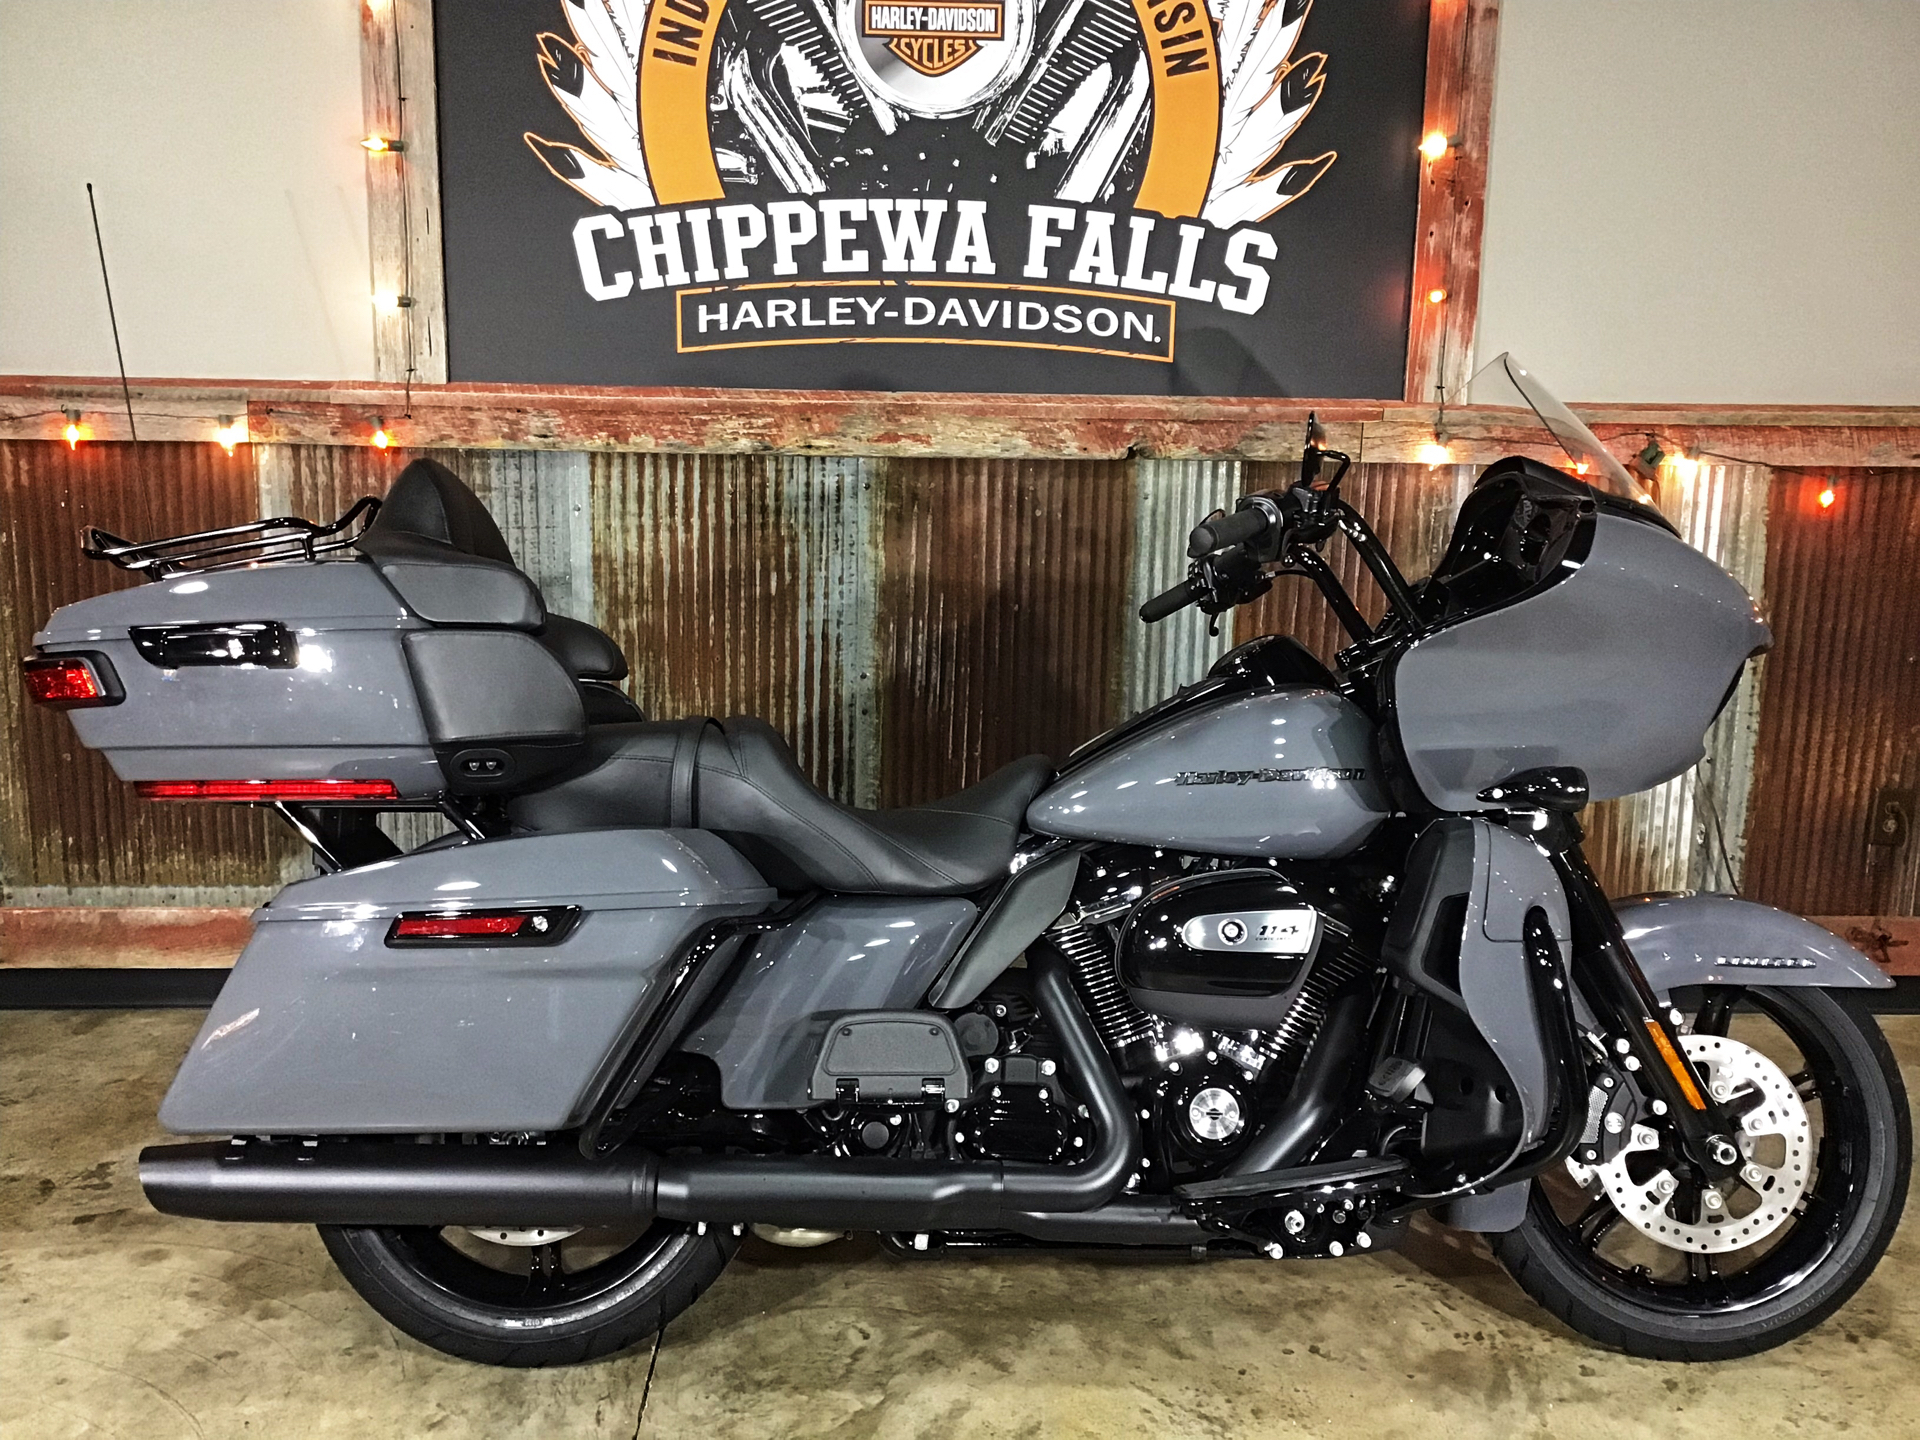 2022 Harley-Davidson Road Glide® Limited in Chippewa Falls, Wisconsin - Photo 1